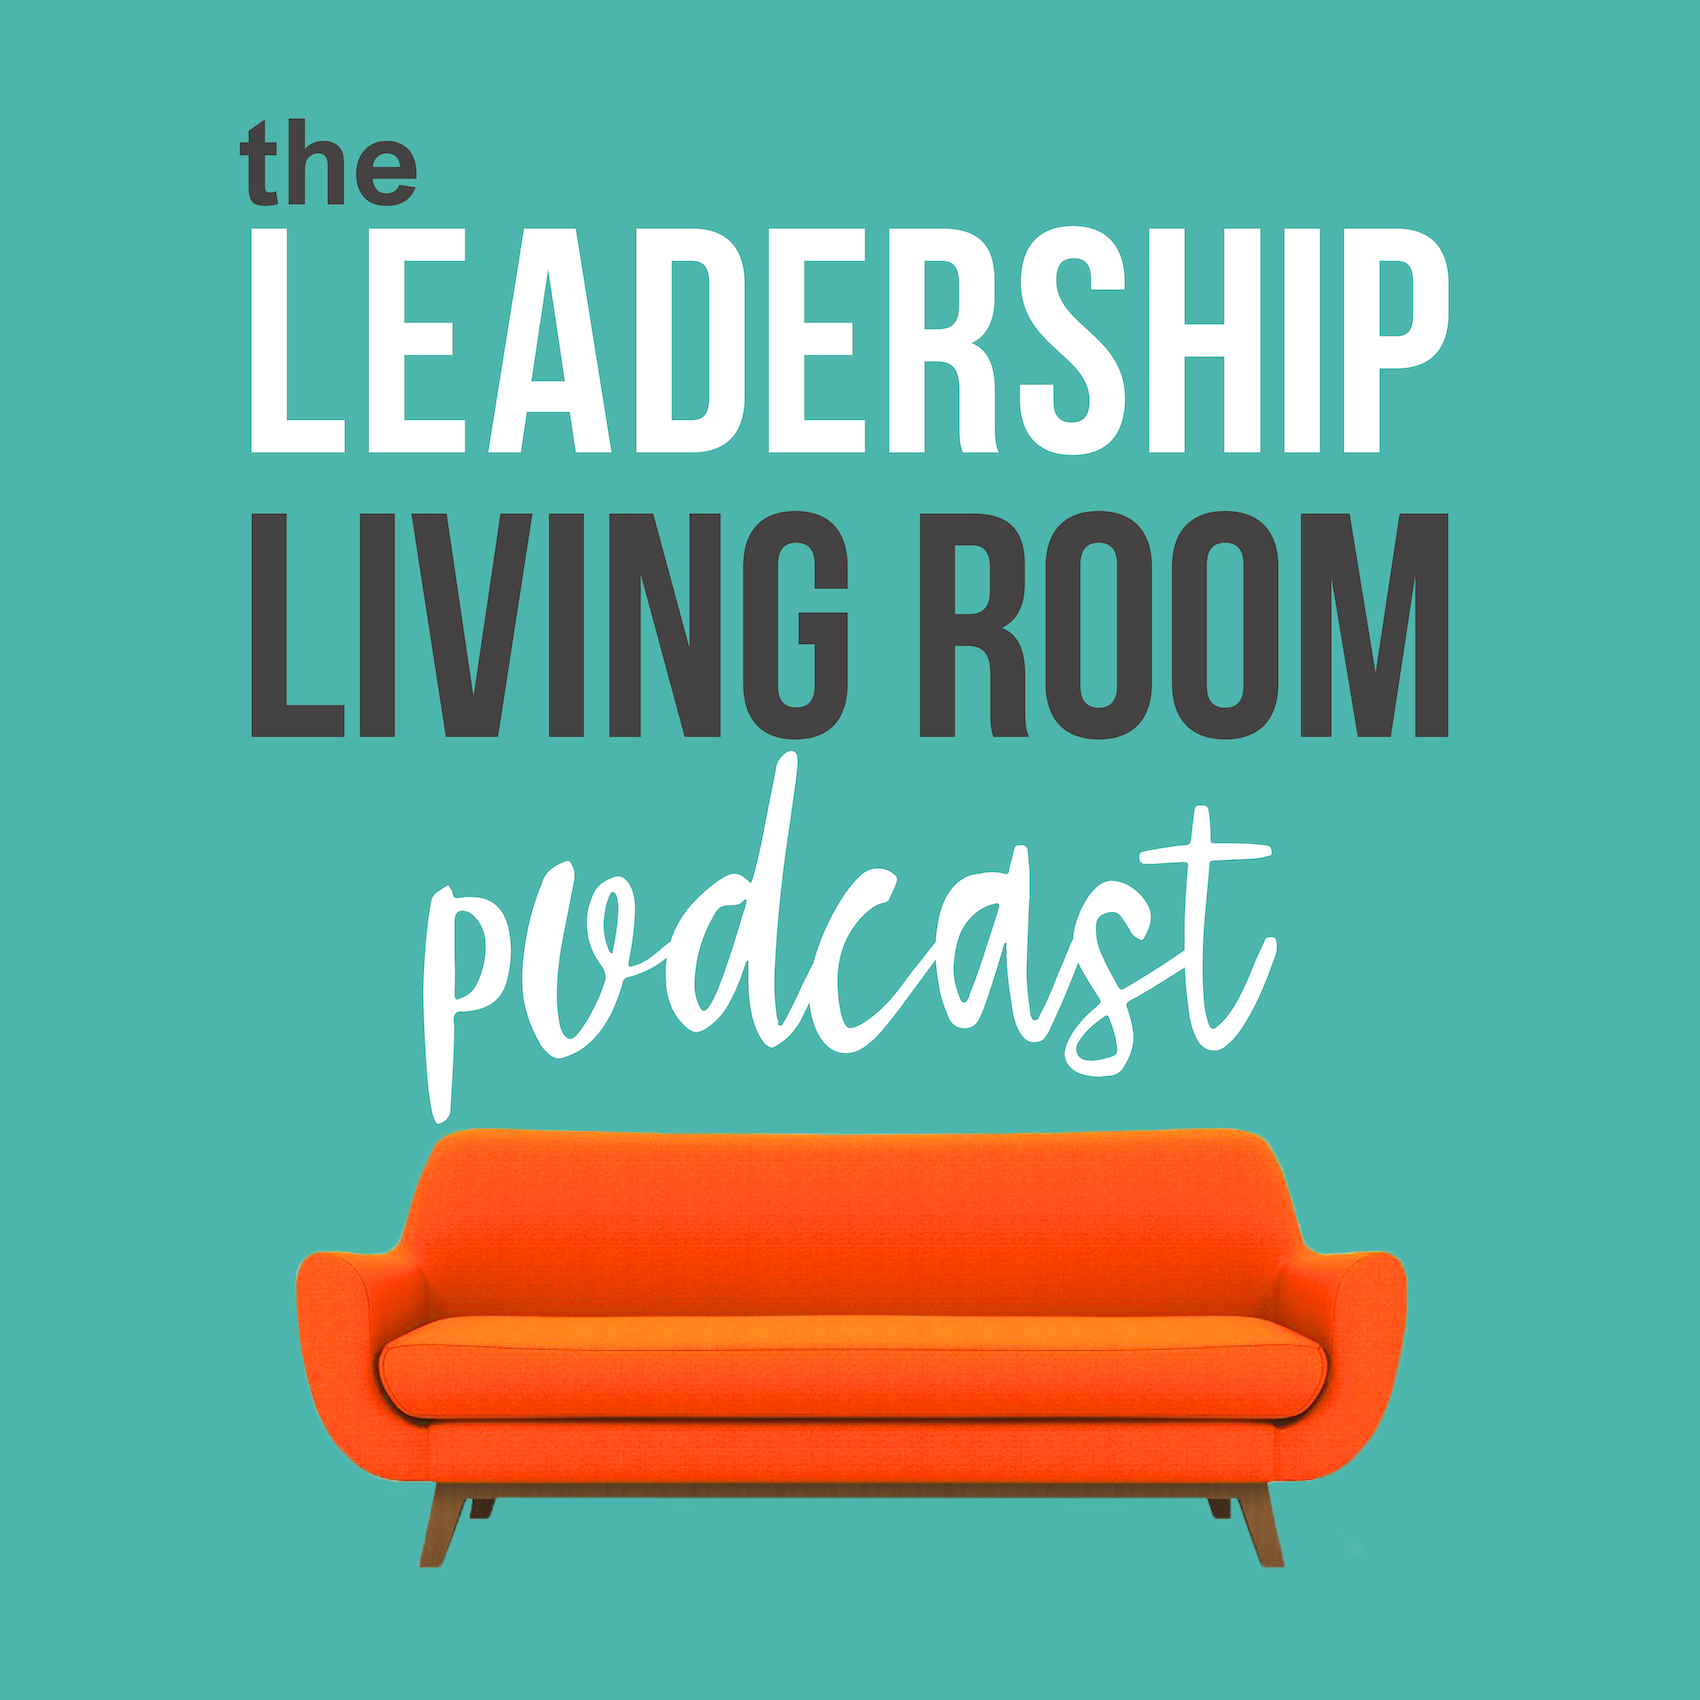 The Leadership Living Room Podcast